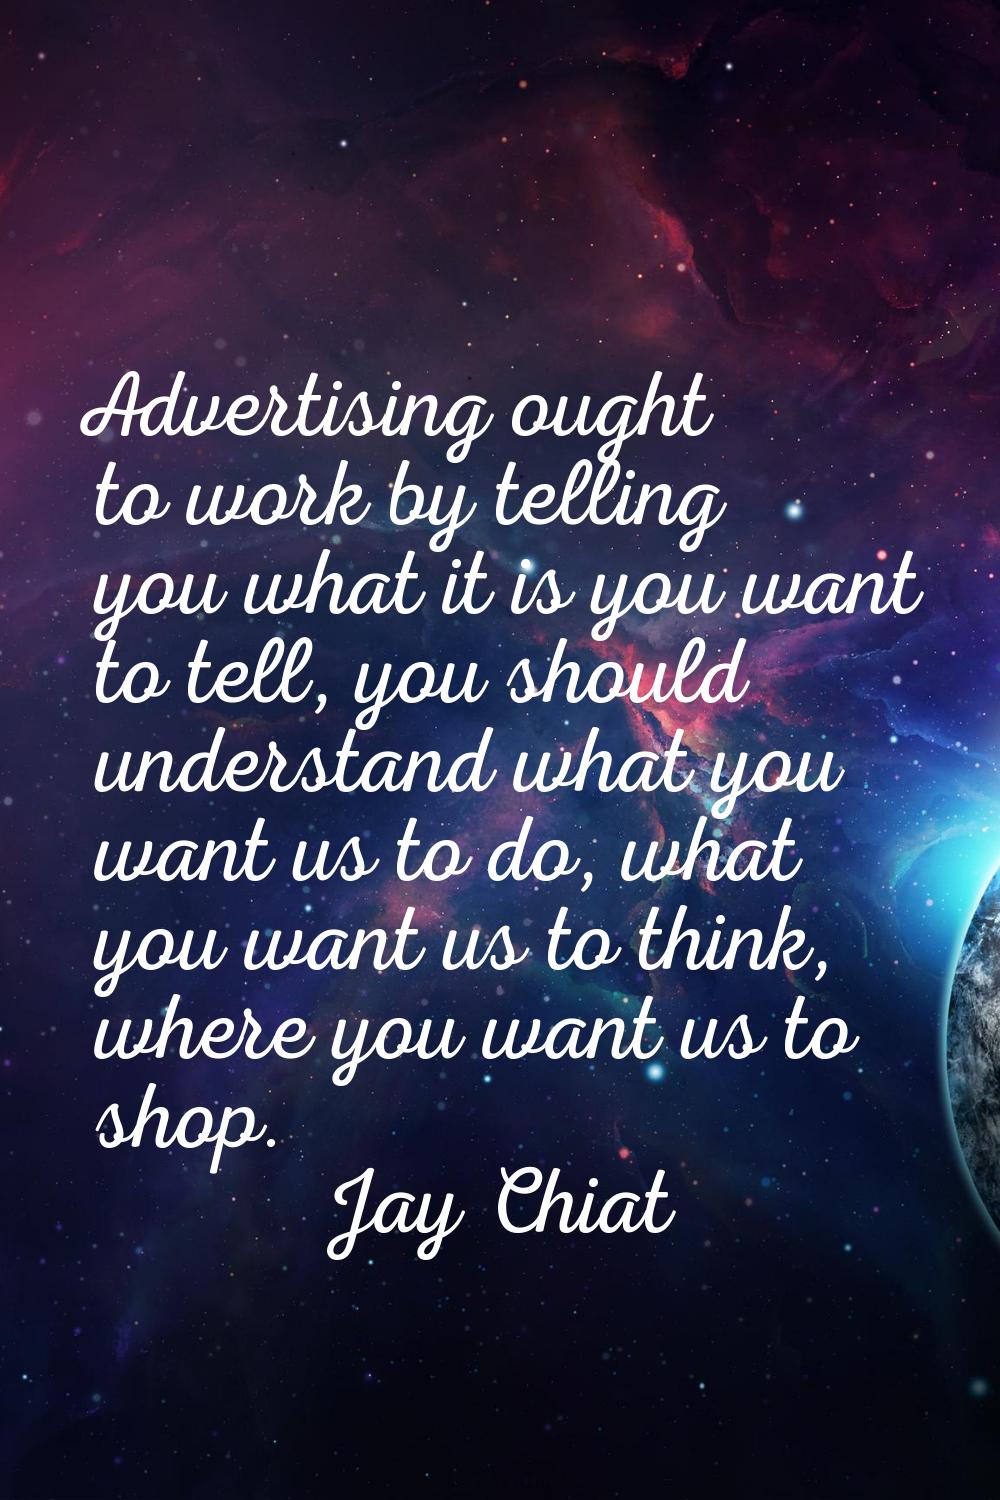 Advertising ought to work by telling you what it is you want to tell, you should understand what yo